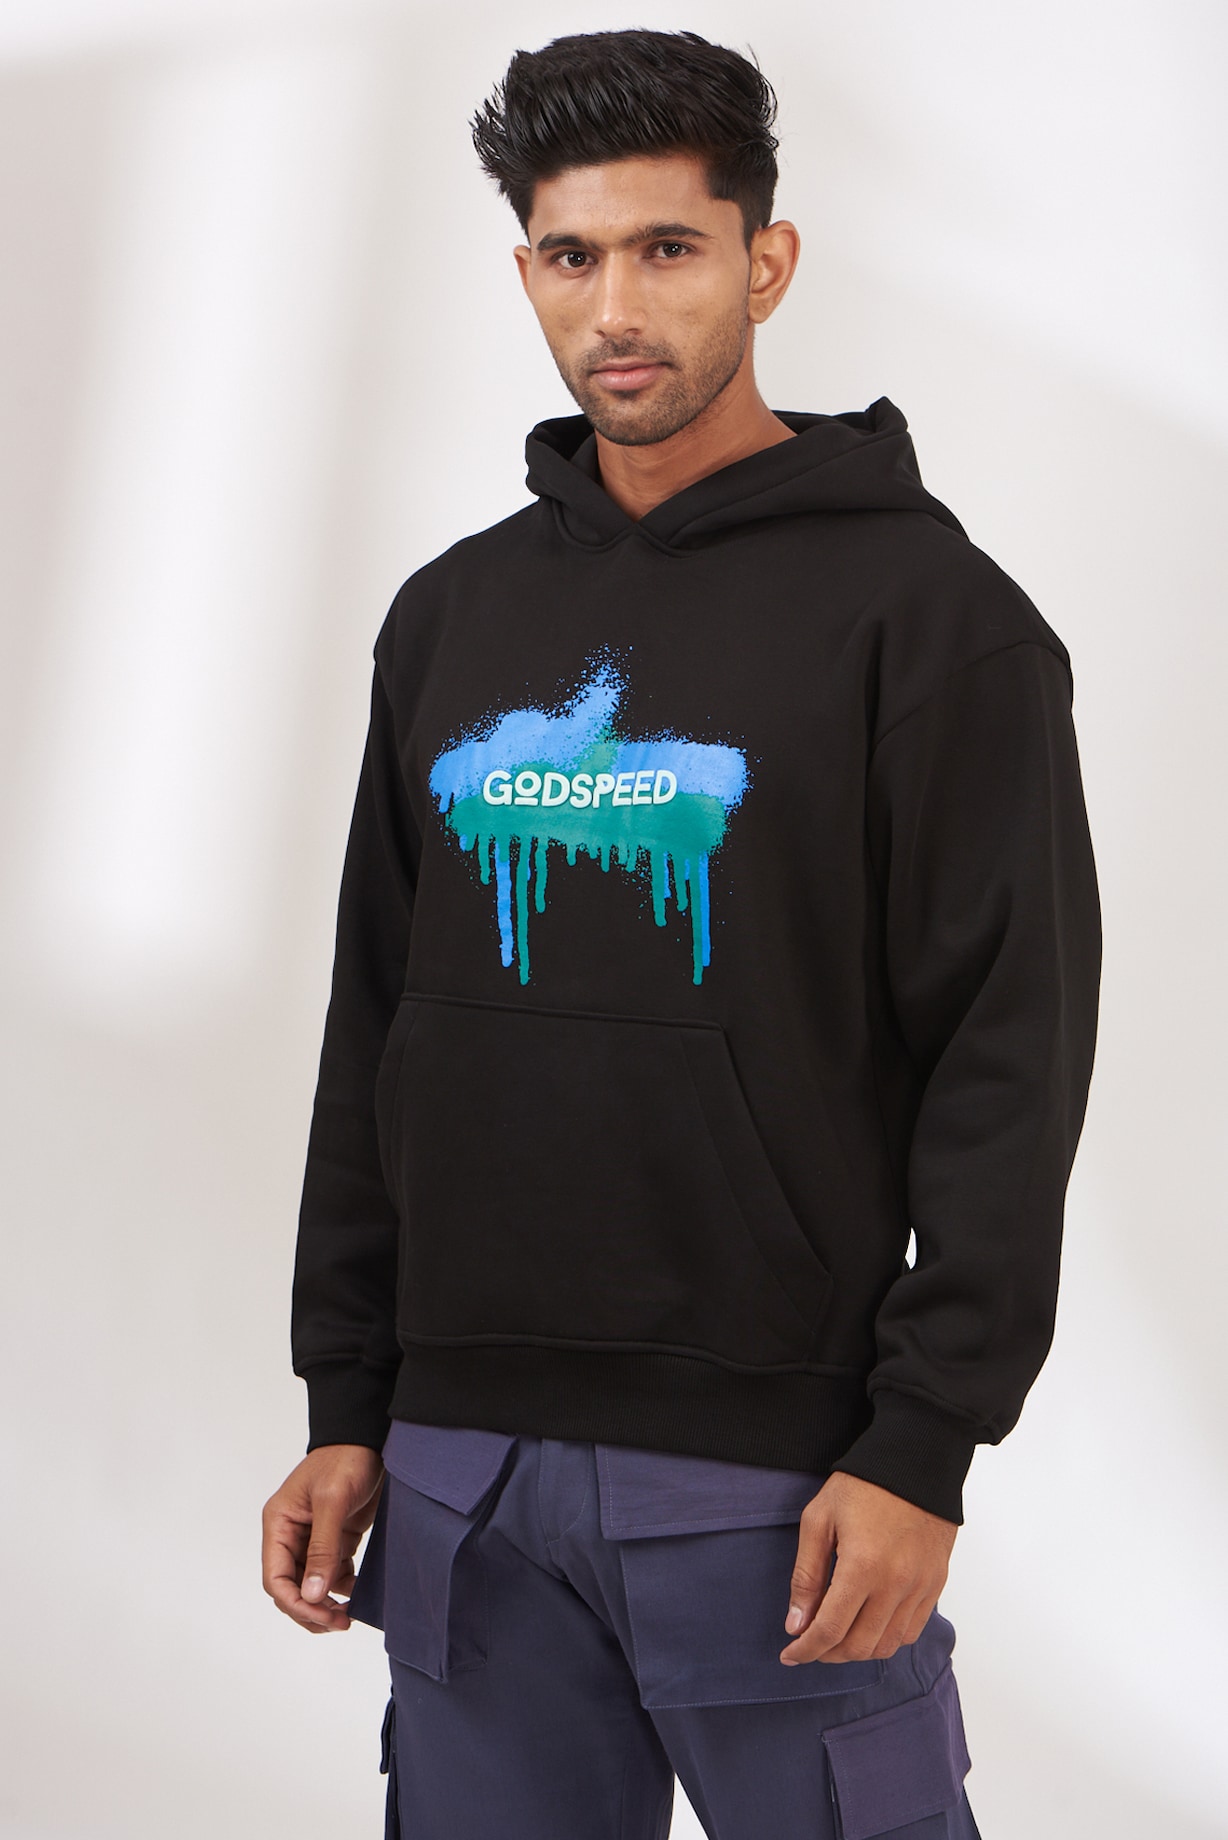 Black Cotton Fleece Hoodie by The Khwaab